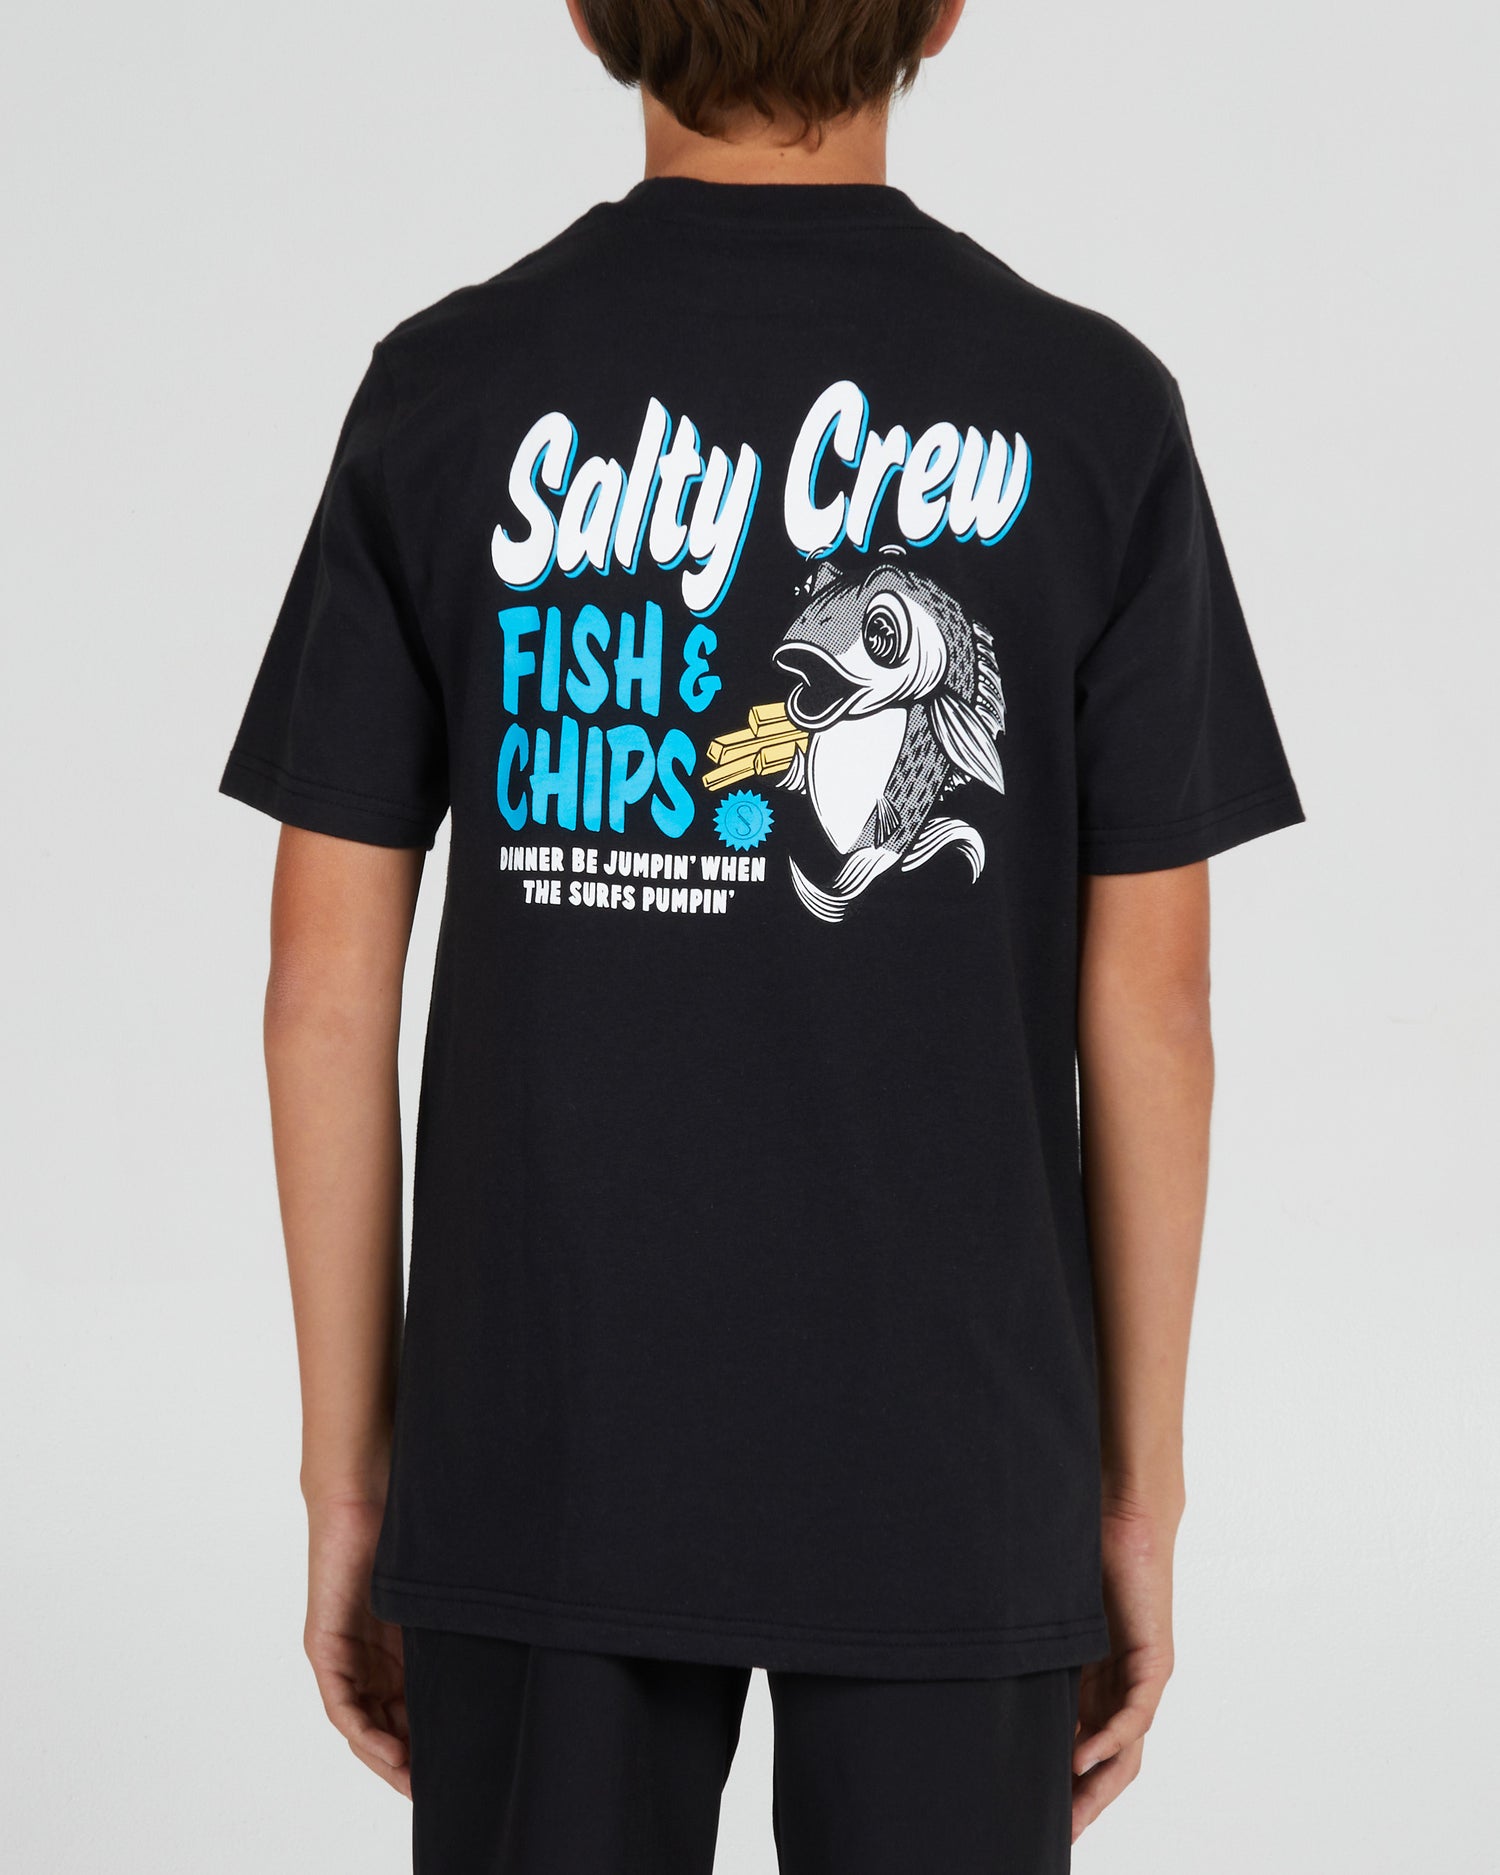 On body back of the Fish And Chips Boys Black S/S Tee